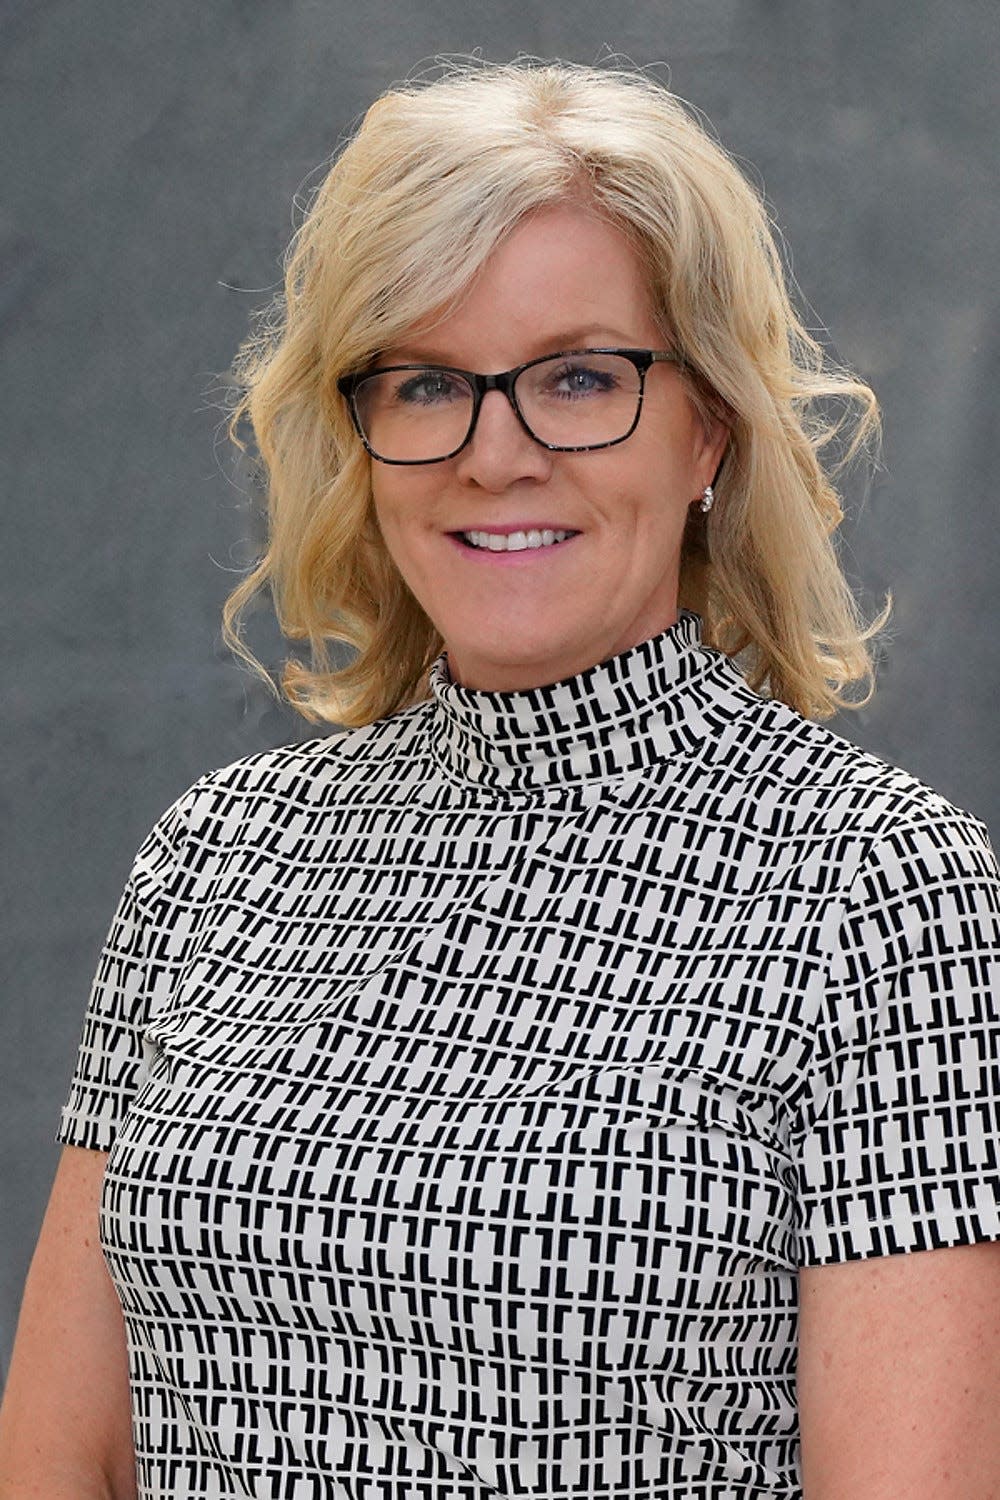 Cynthia Heady is the director of development and external engagement for the Lenawee Community Foundation. She assists individuals, corporations and organizations in fulfilling their charitable goals for the community.